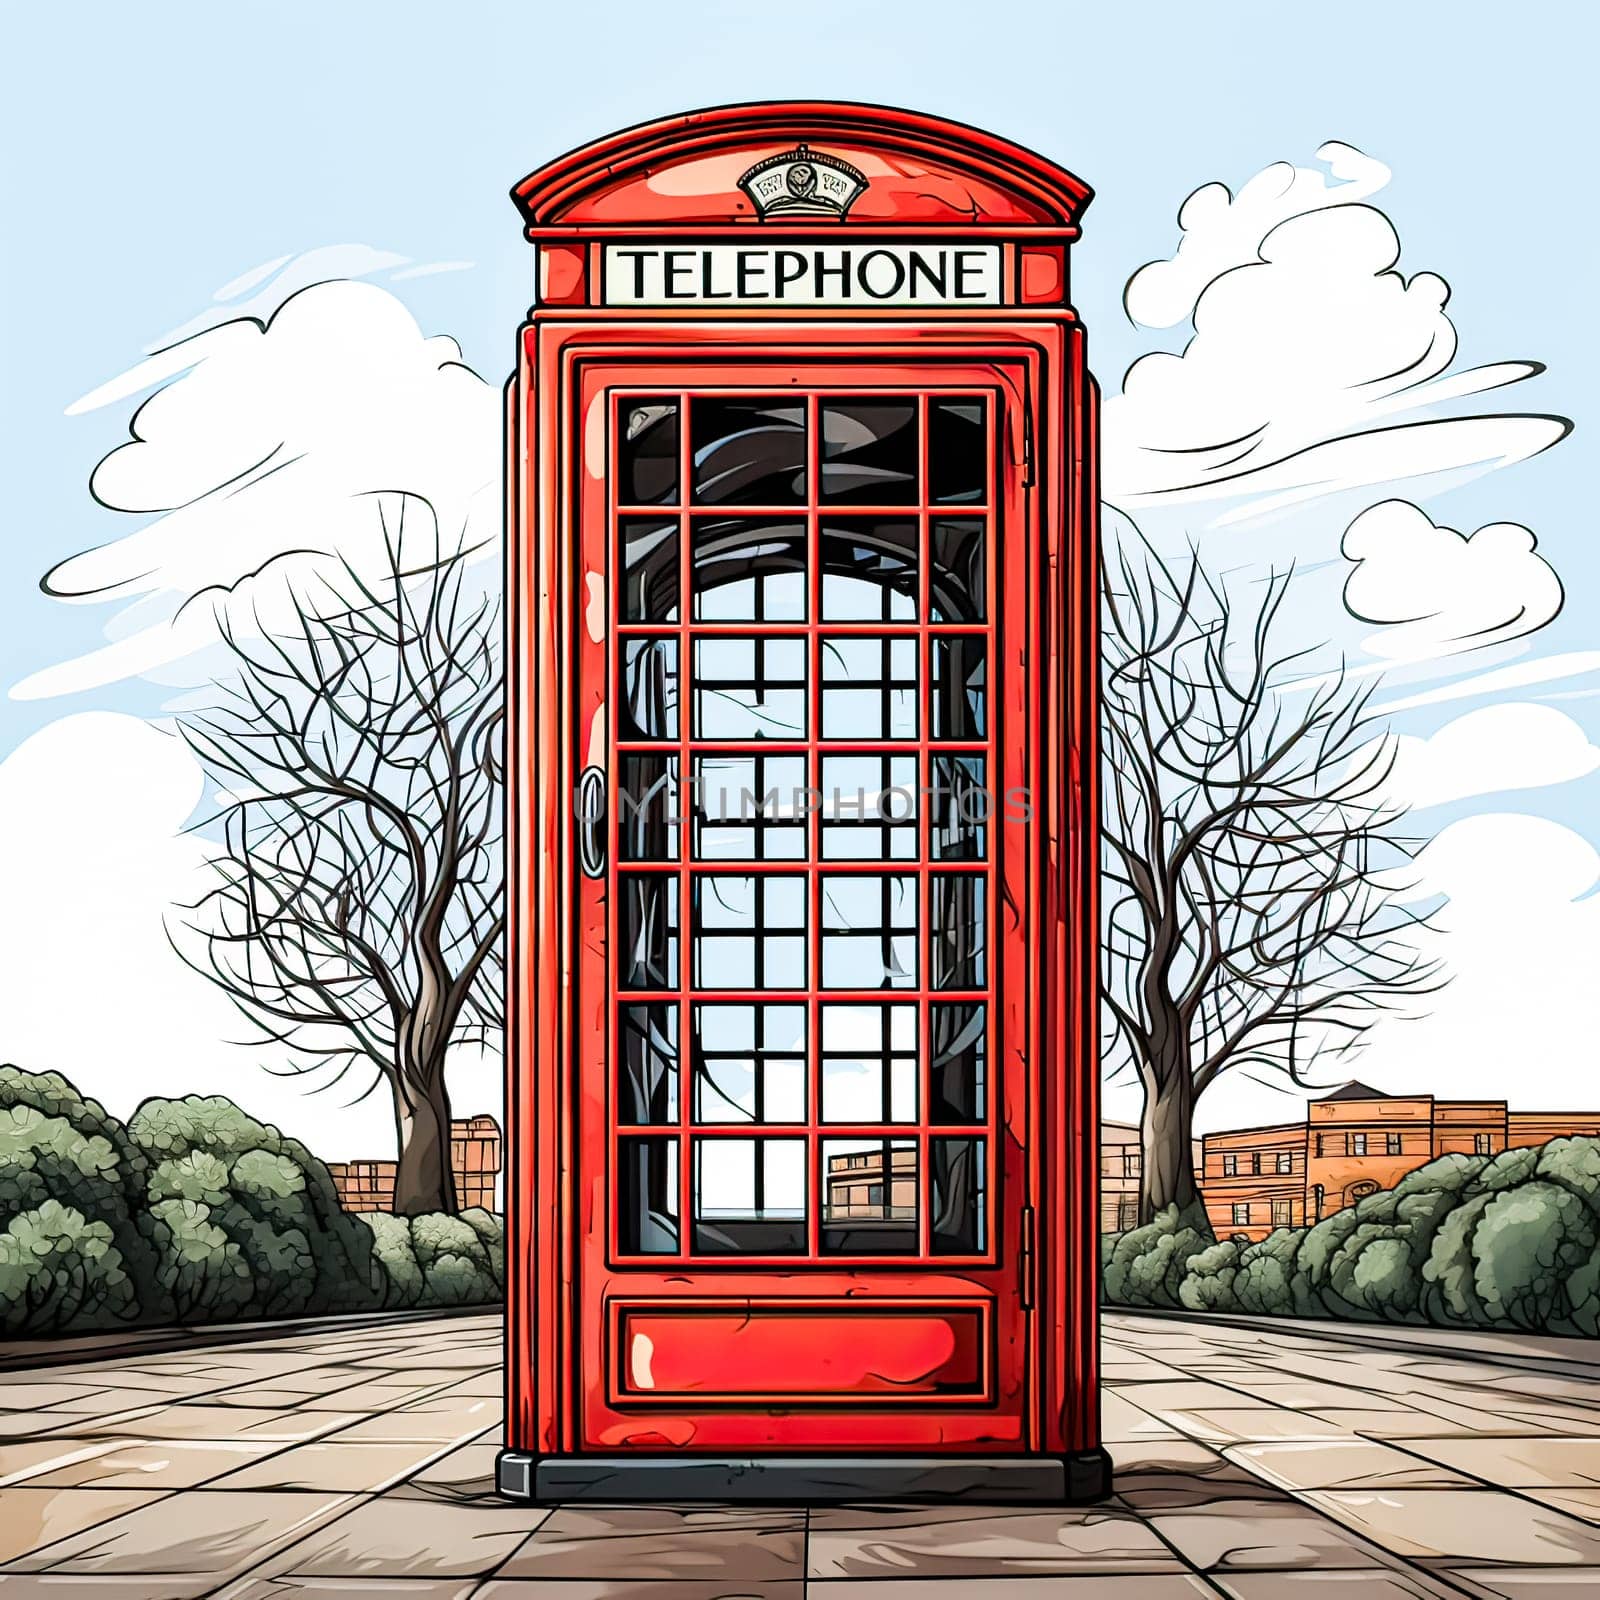 Londons Iconic Phone Booth, A watercolor sketch captures the classic red booth amidst a charming street scene